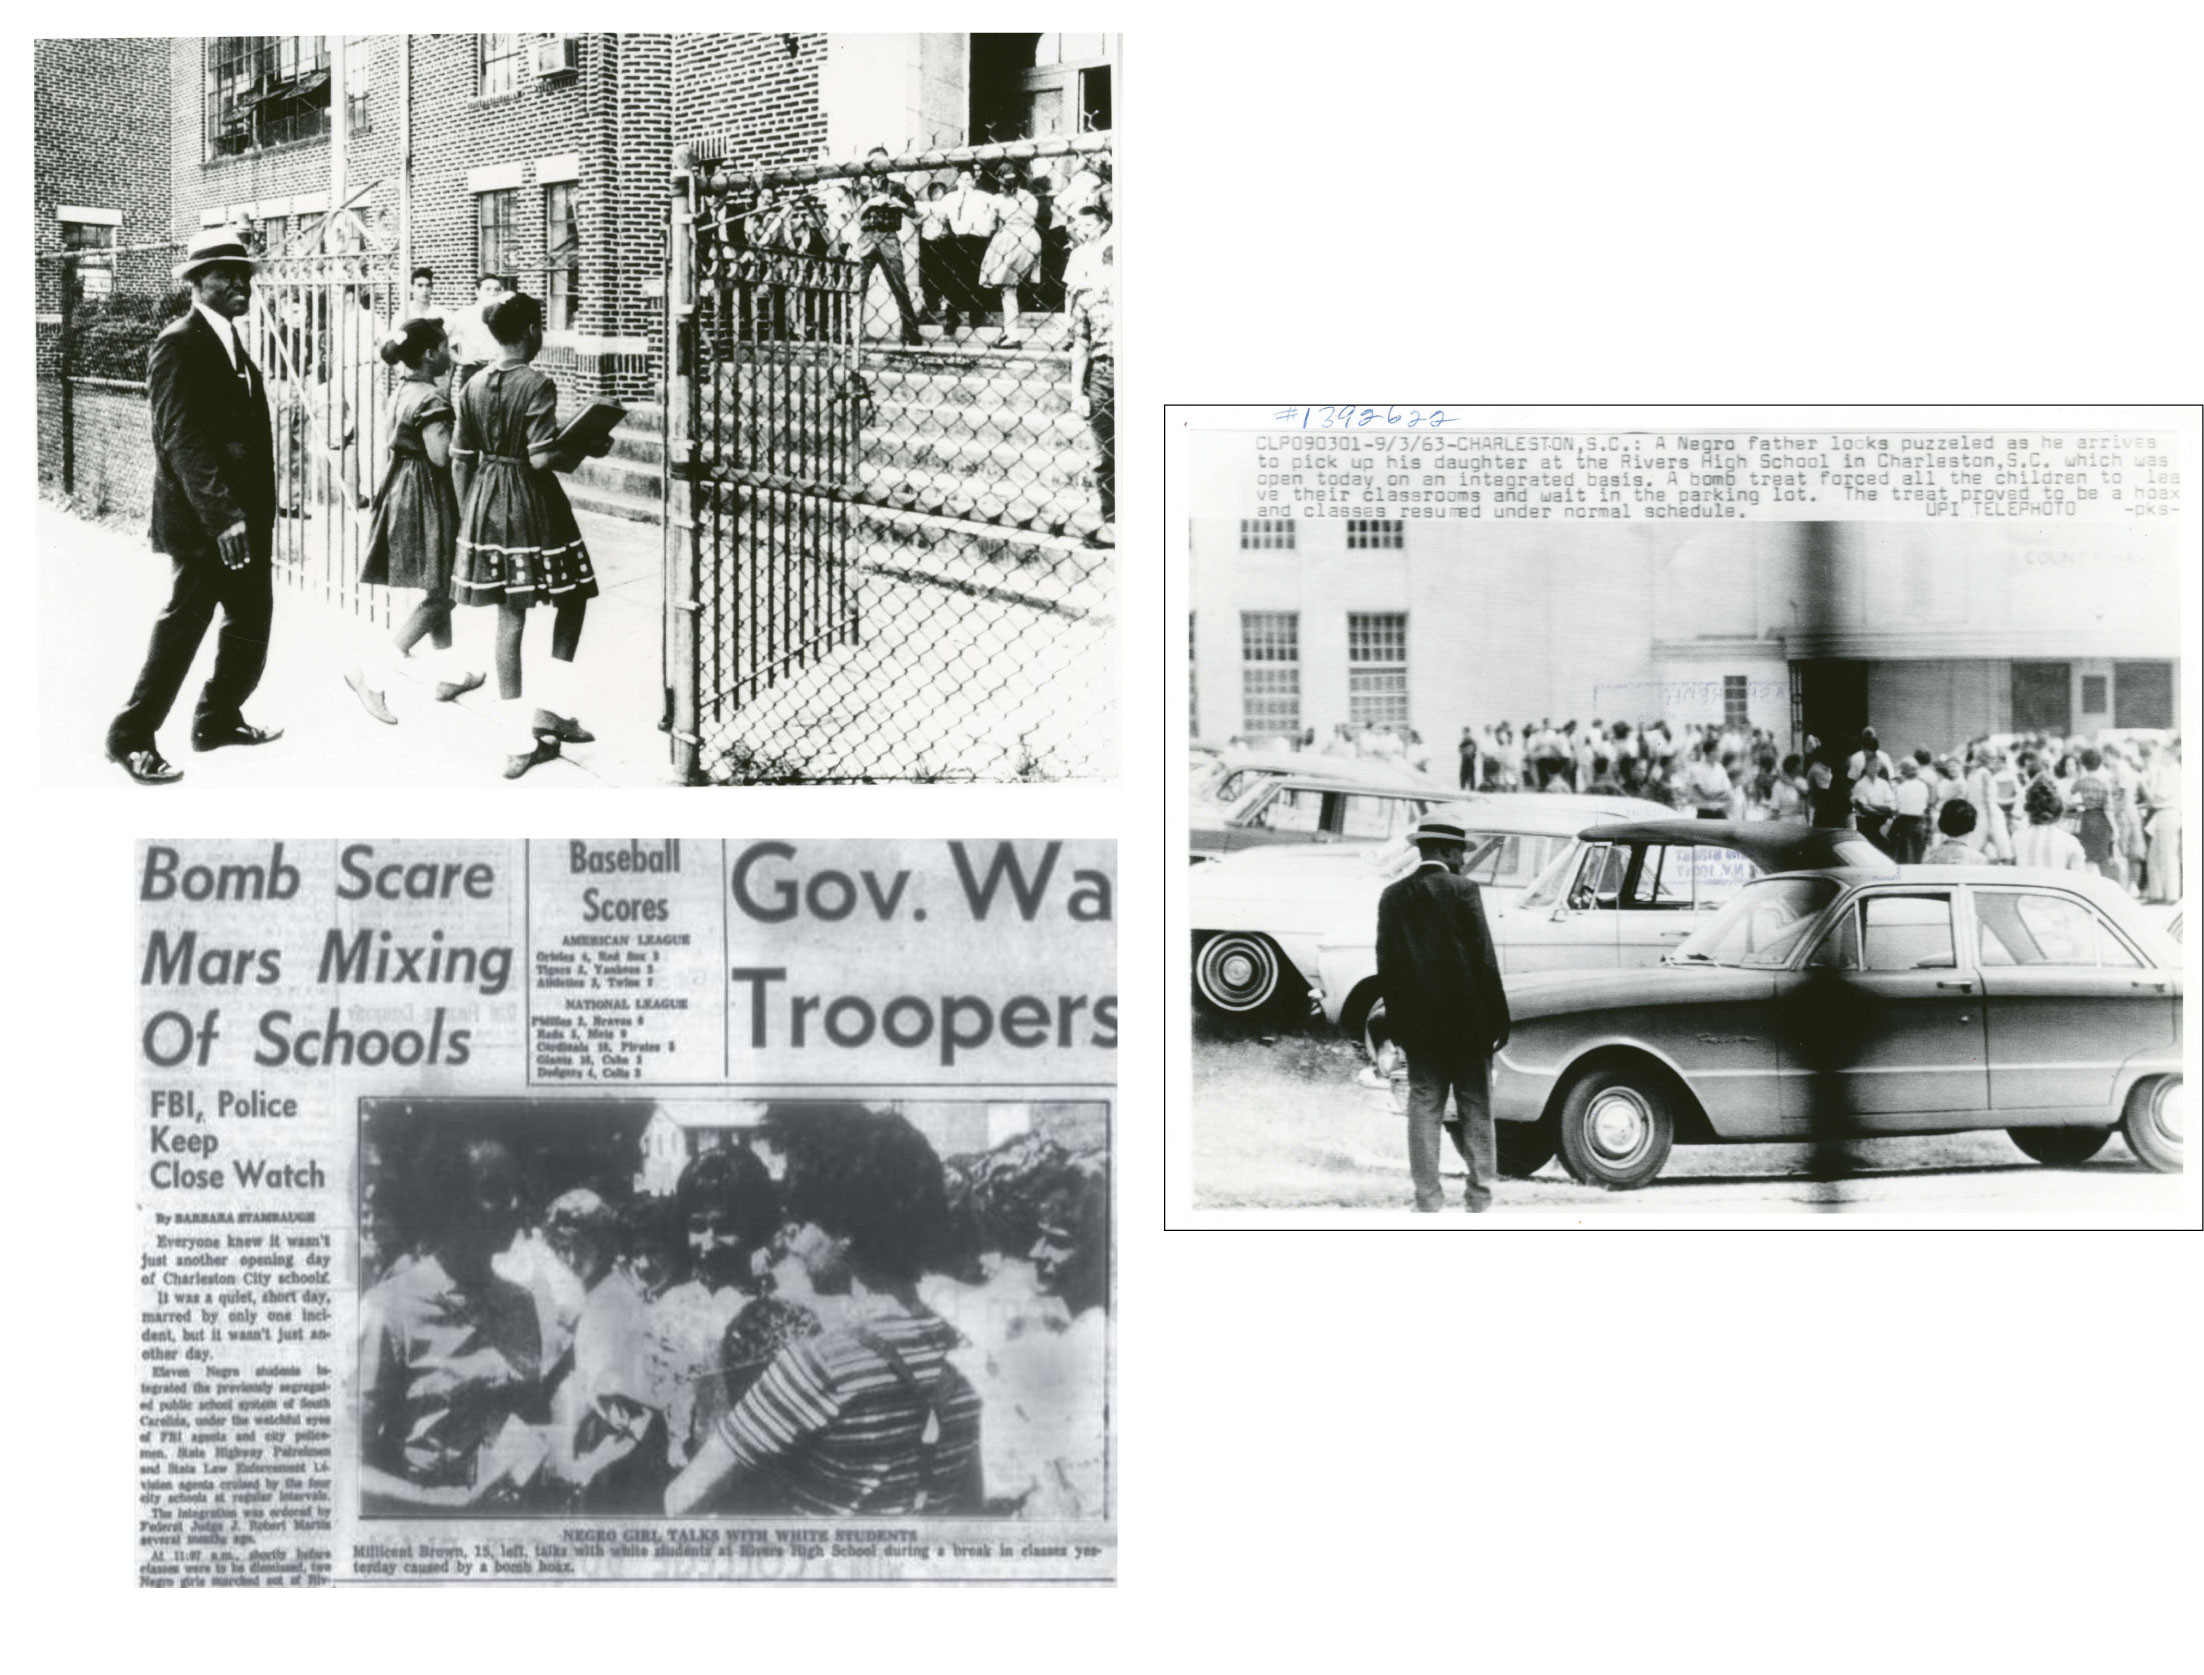 (Counterclockwise from left) The front page of The News and Courier, as well as newspapers across the country, featured Millicent Brown’s first day at Rivers High School, during which three bomb threats forced students to be evacuated into the parking lot. Further down King Street, Clarence Ford escorted his daughter, Barbara, and Oveta Glover into the formerly all-white James Simons Elementary School.